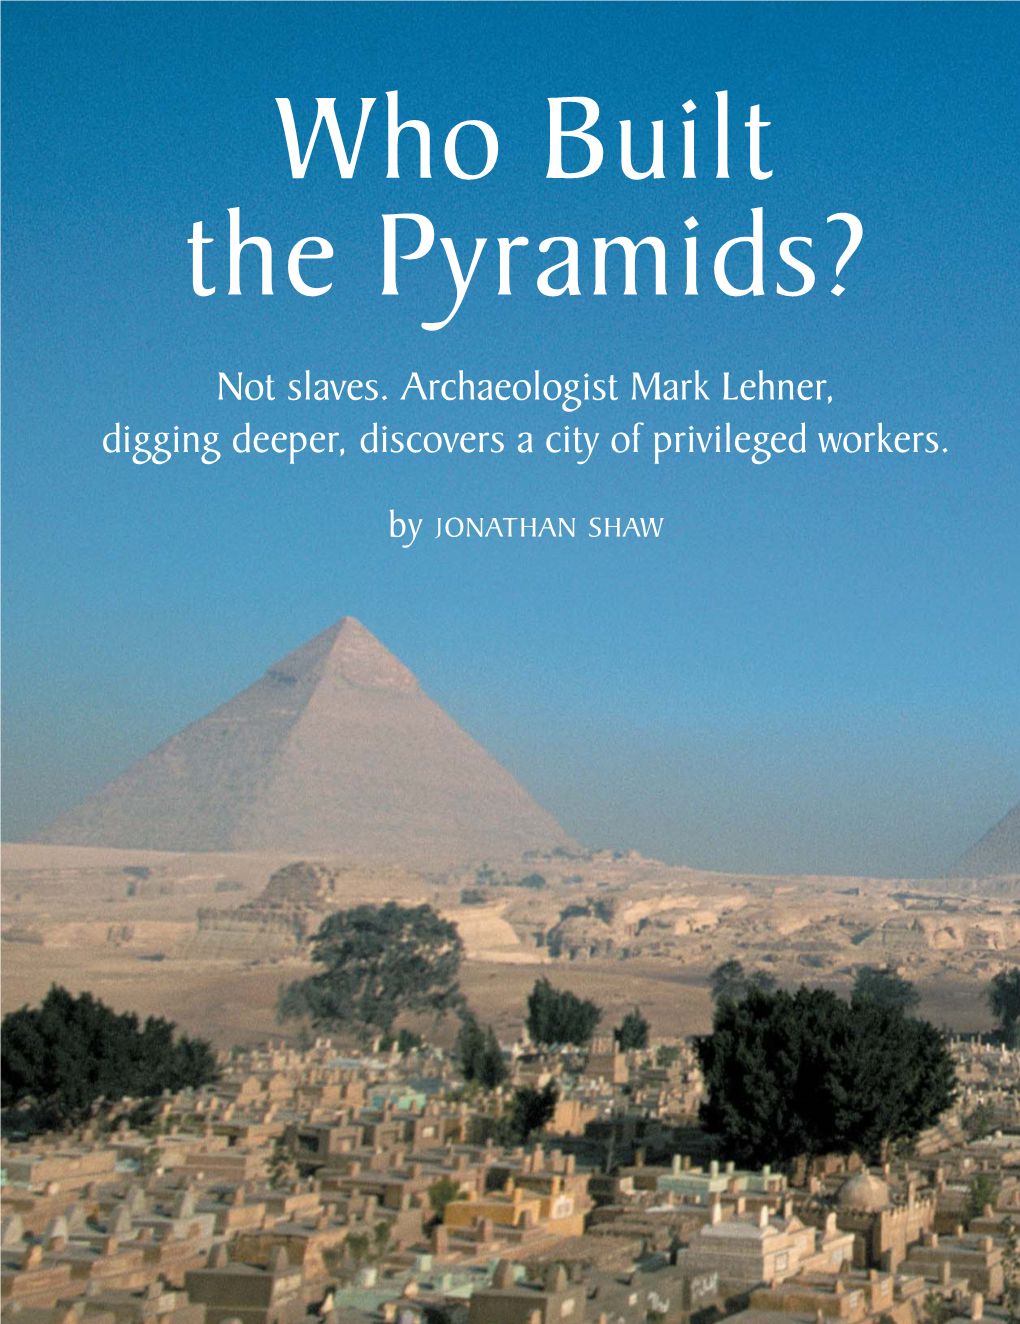 Not Slaves. Archaeologist Mark Lehner, Digging Deeper, Discovers a City of Privileged Workers